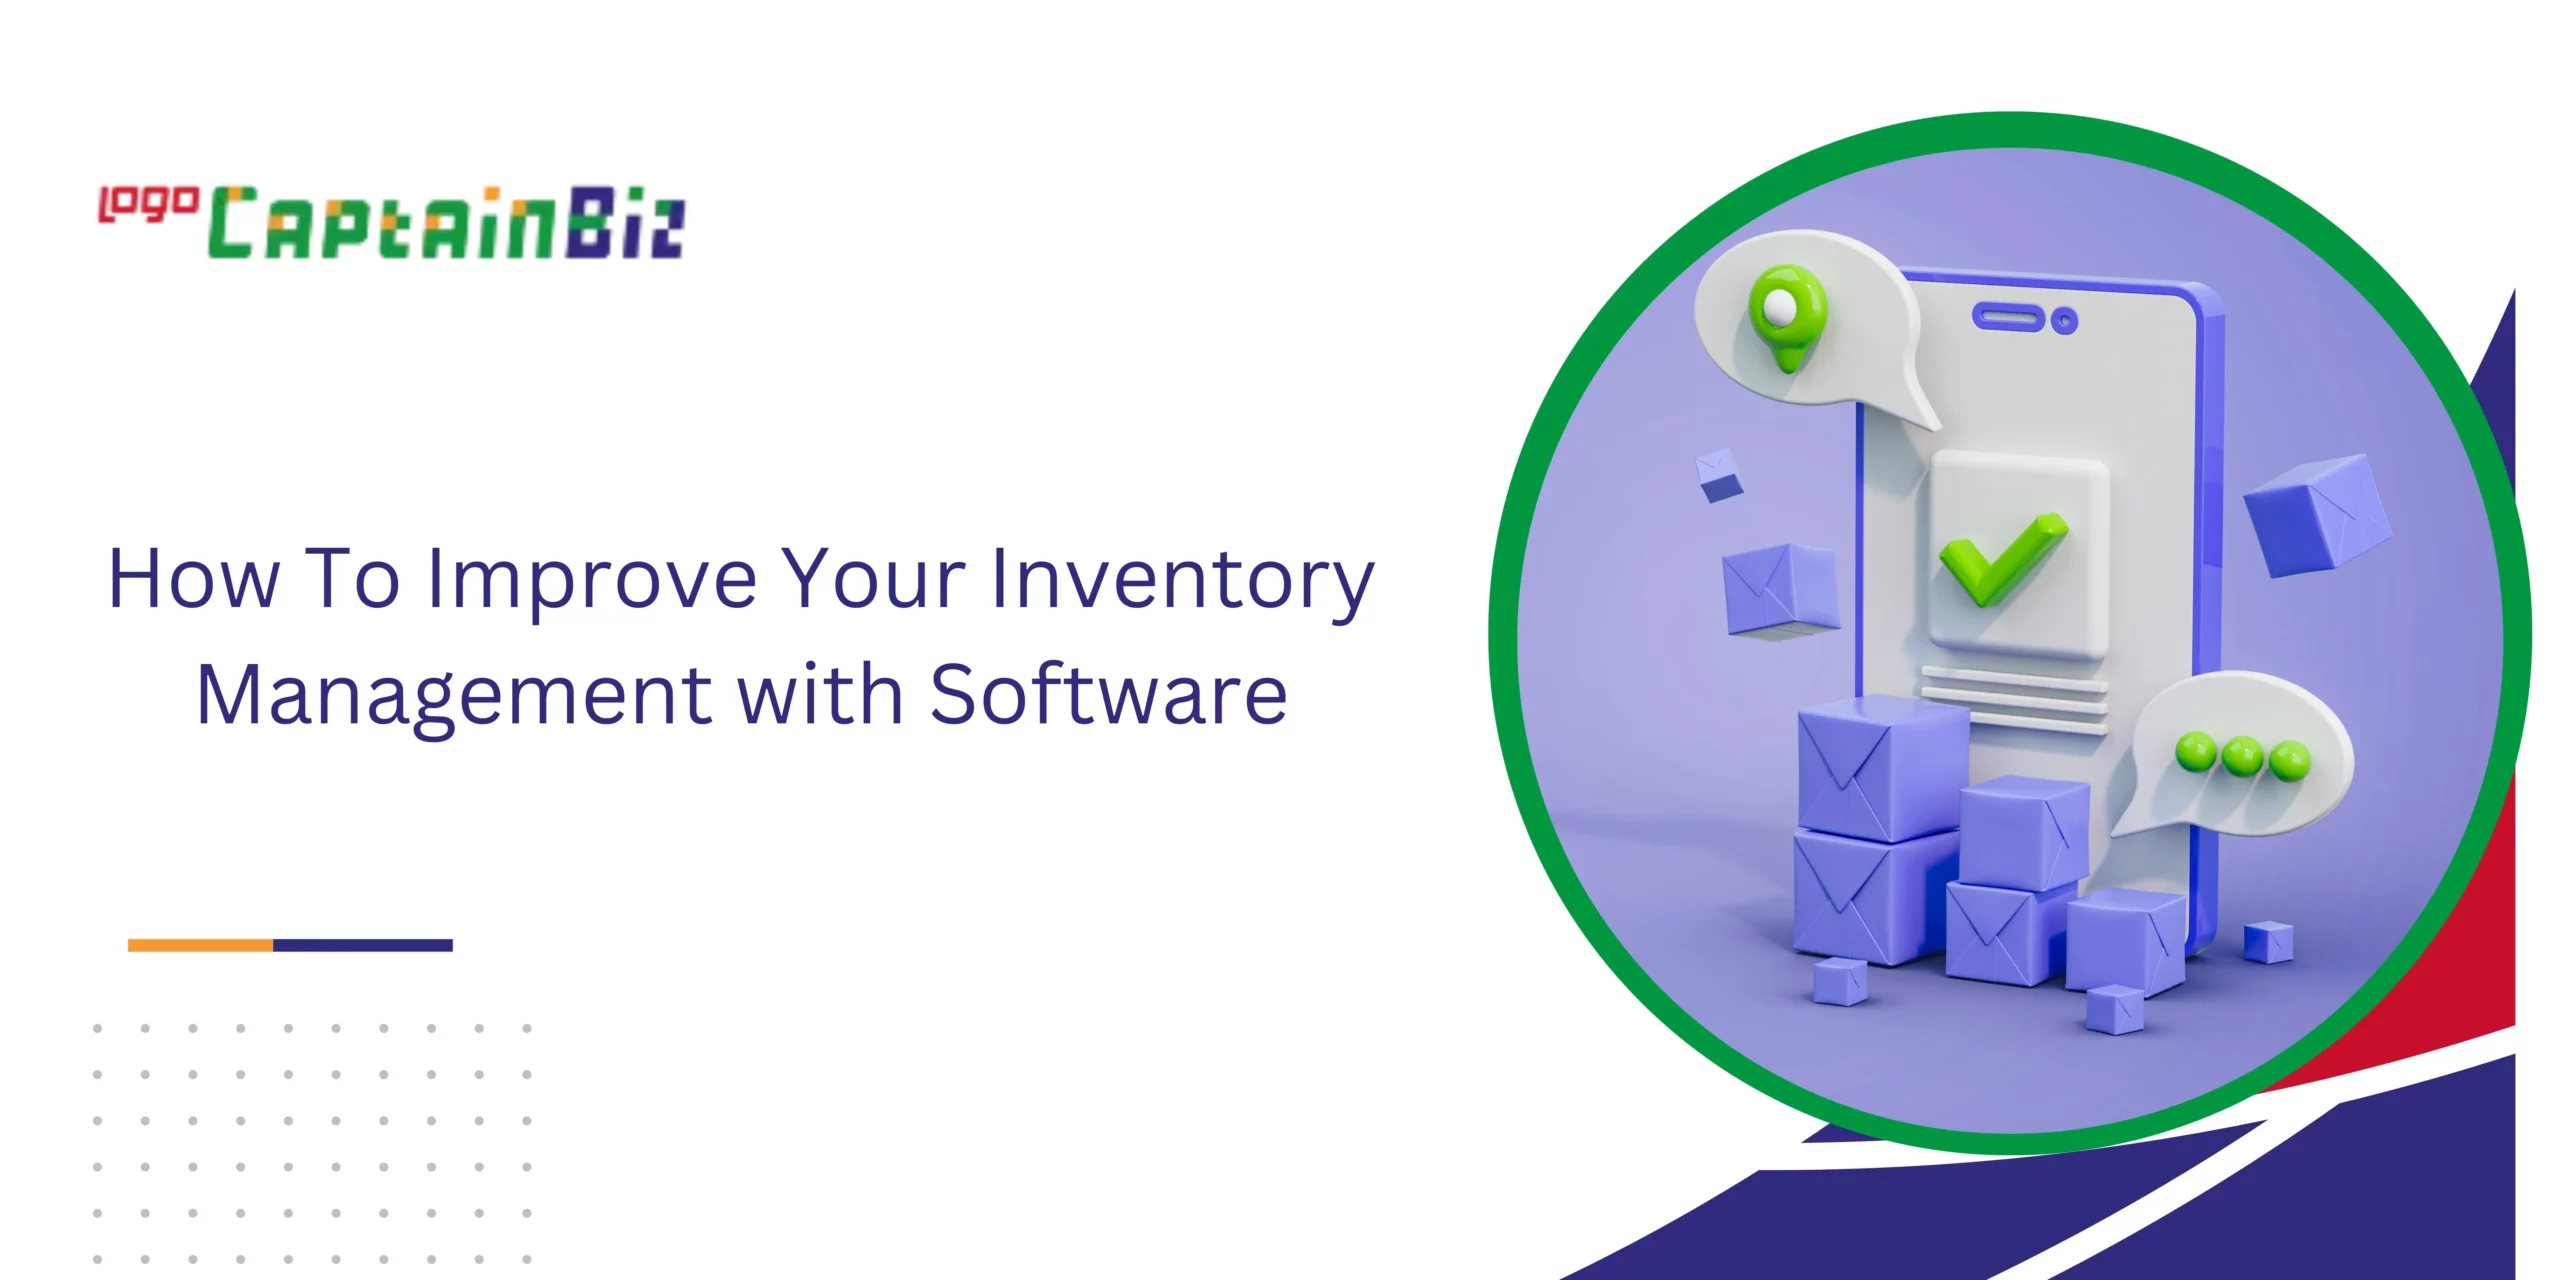 CaptainBiz: How To Improve Your Inventory Management with Software